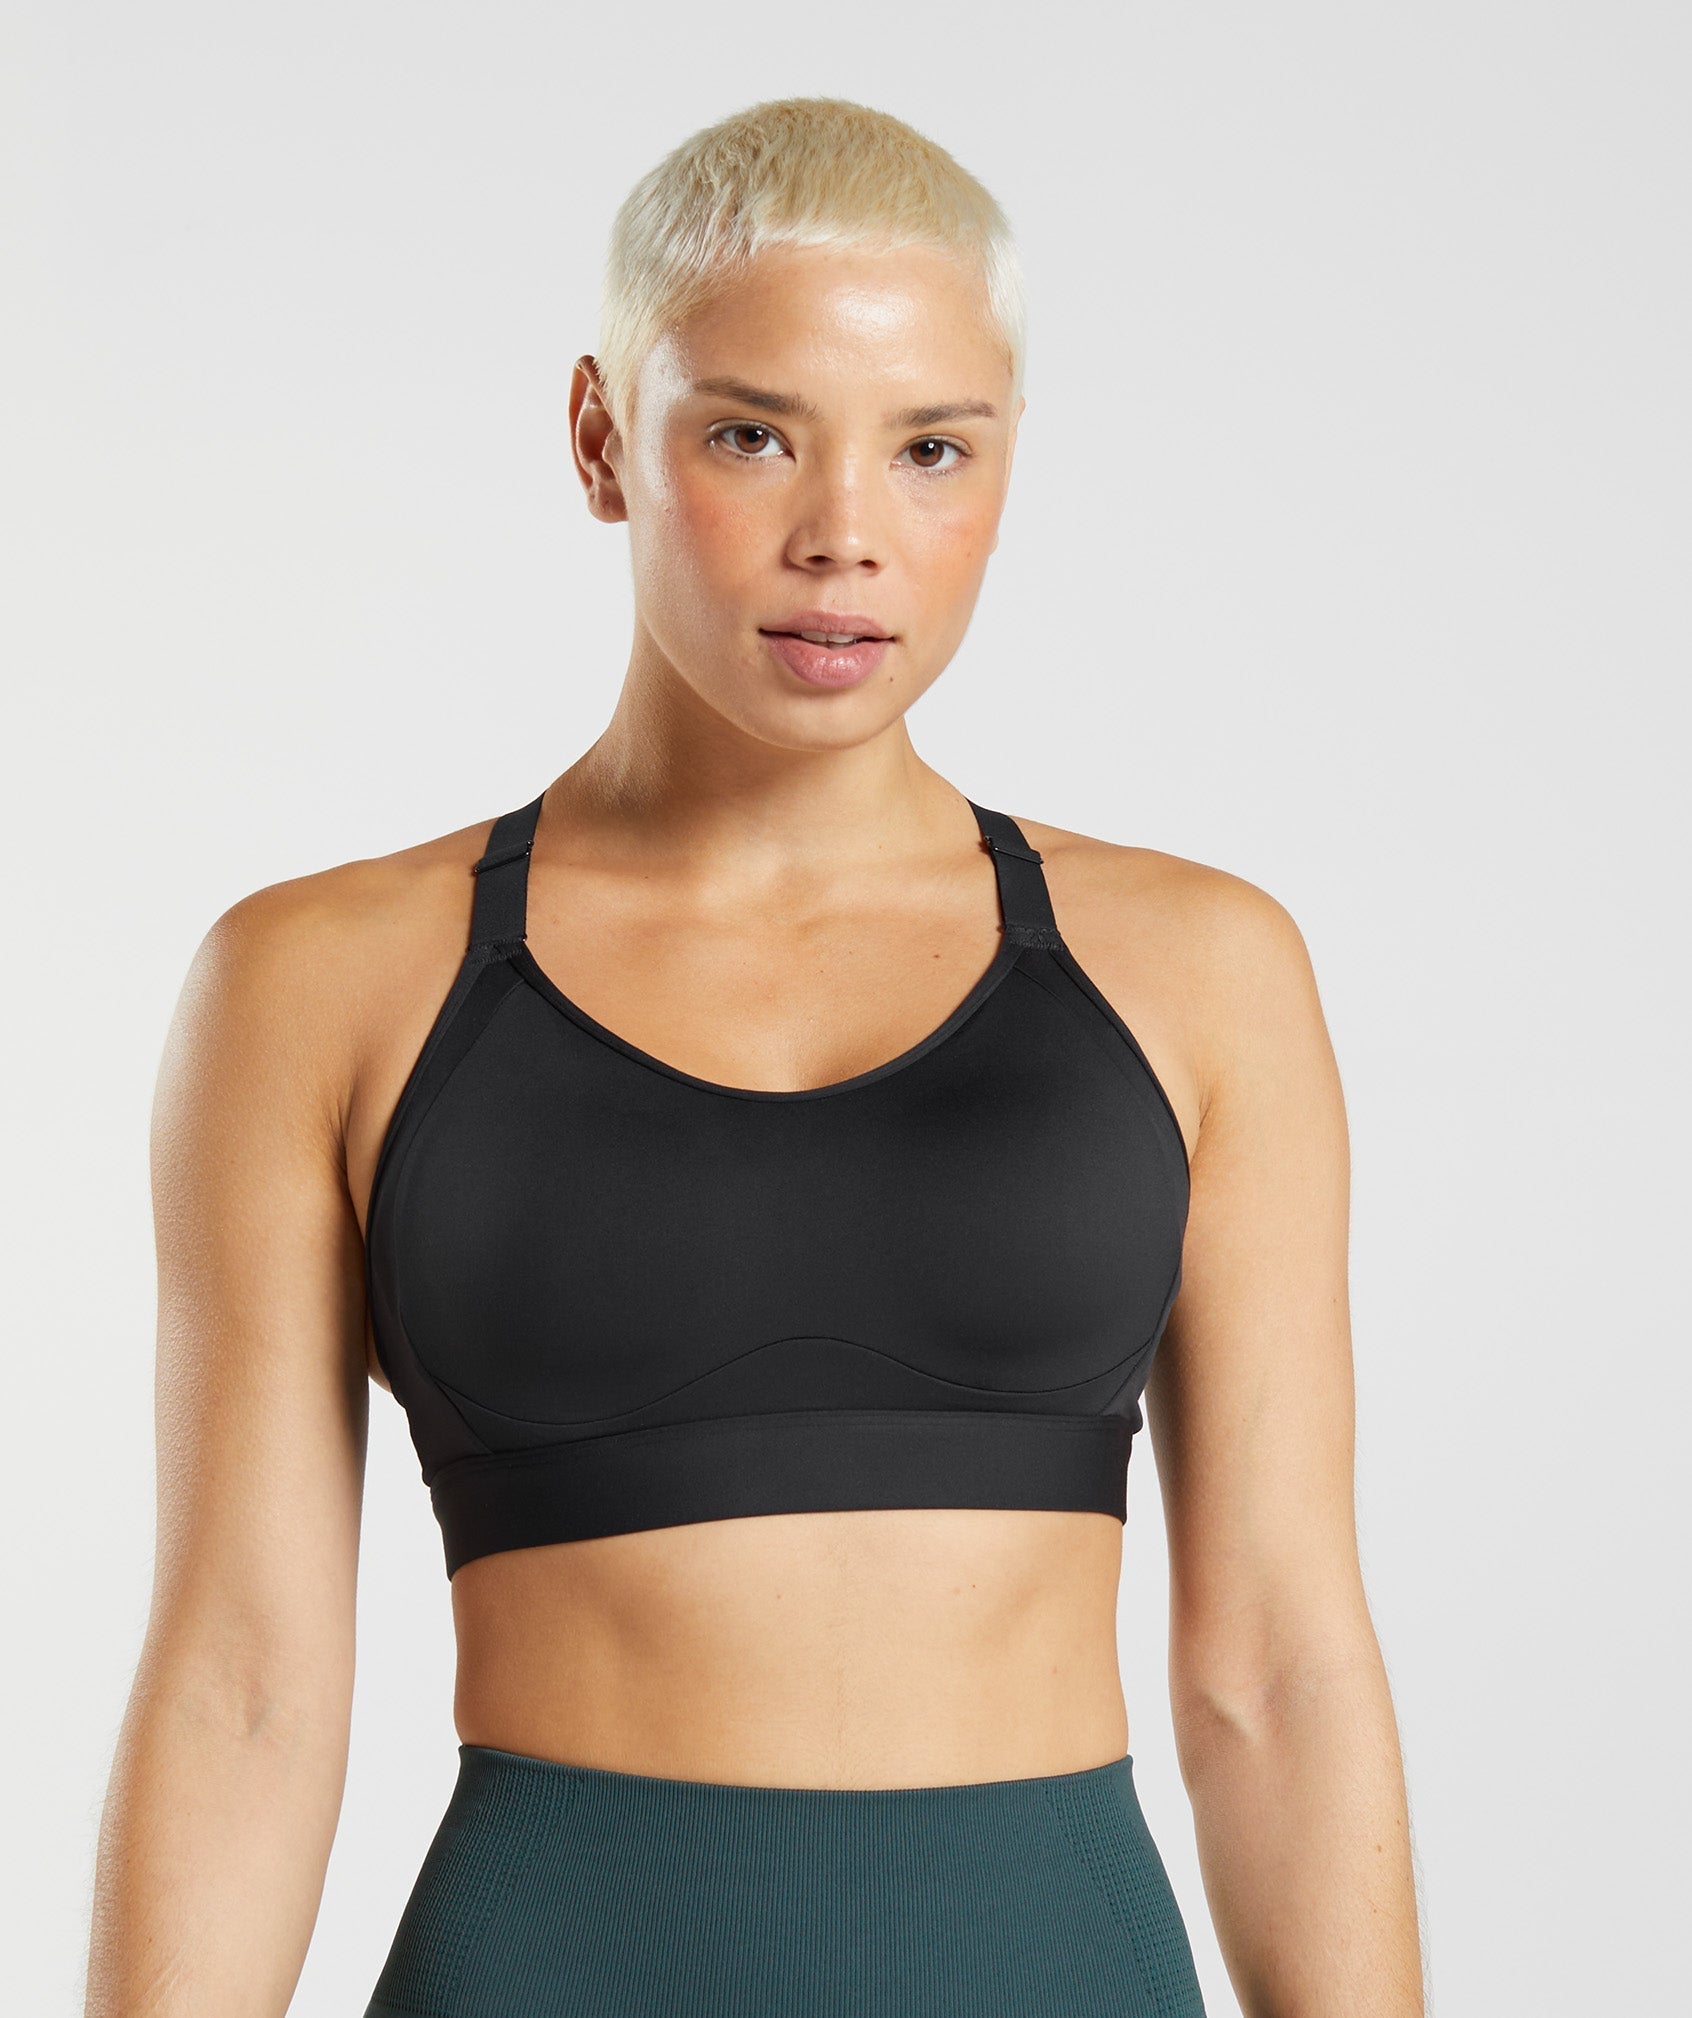 Gymshark Minimal sports bra! Let me know if you've tried cutting this , Gymshark